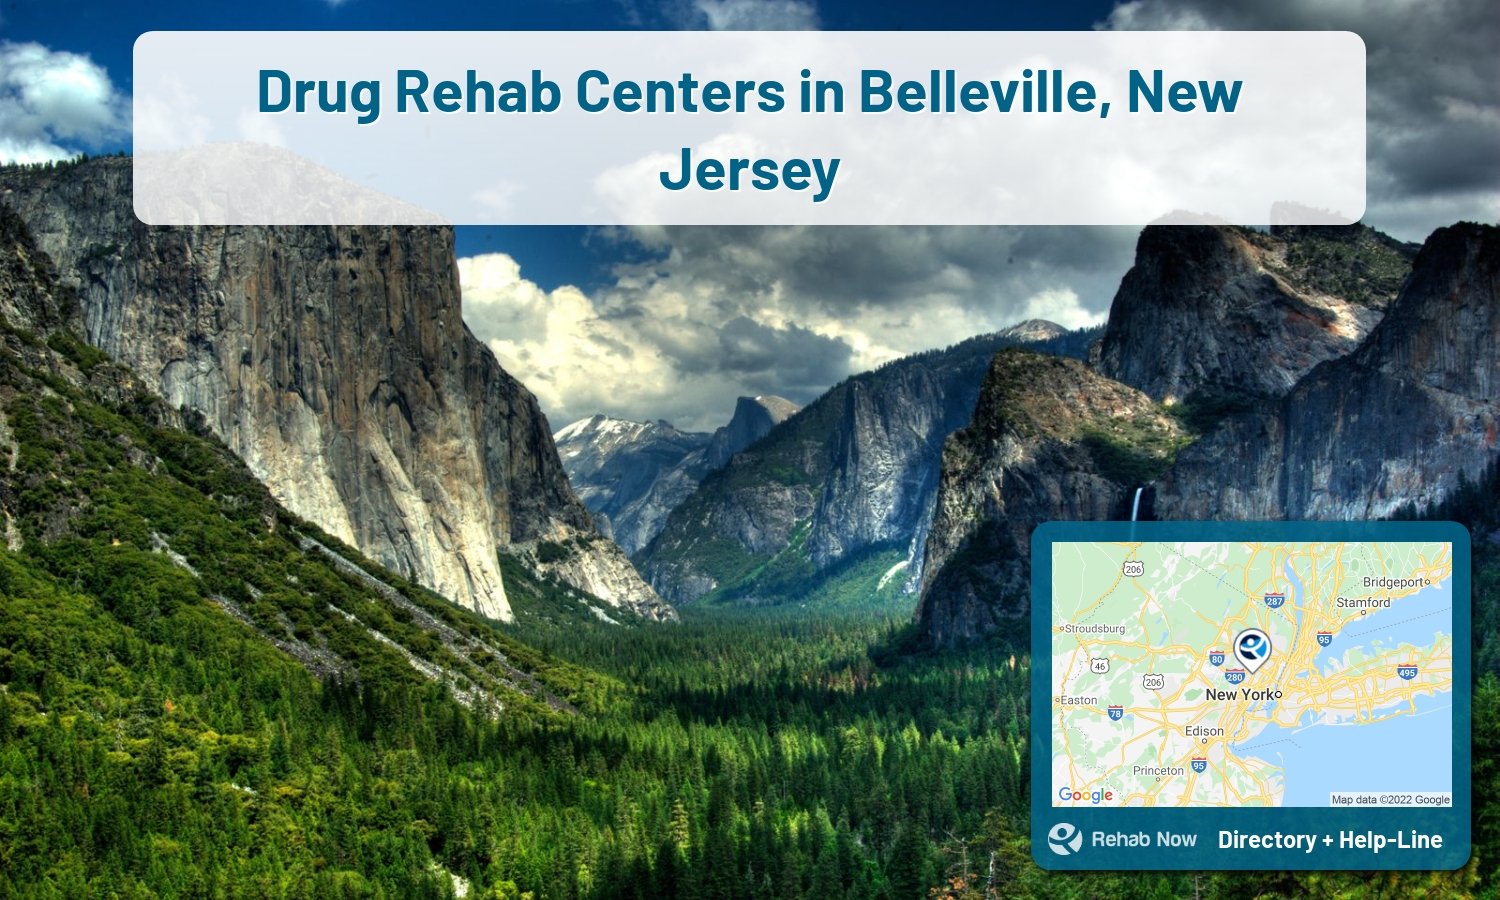 Let our expert counselors help find the best addiction treatment in Belleville, New Jersey now with a free call to our hotline.